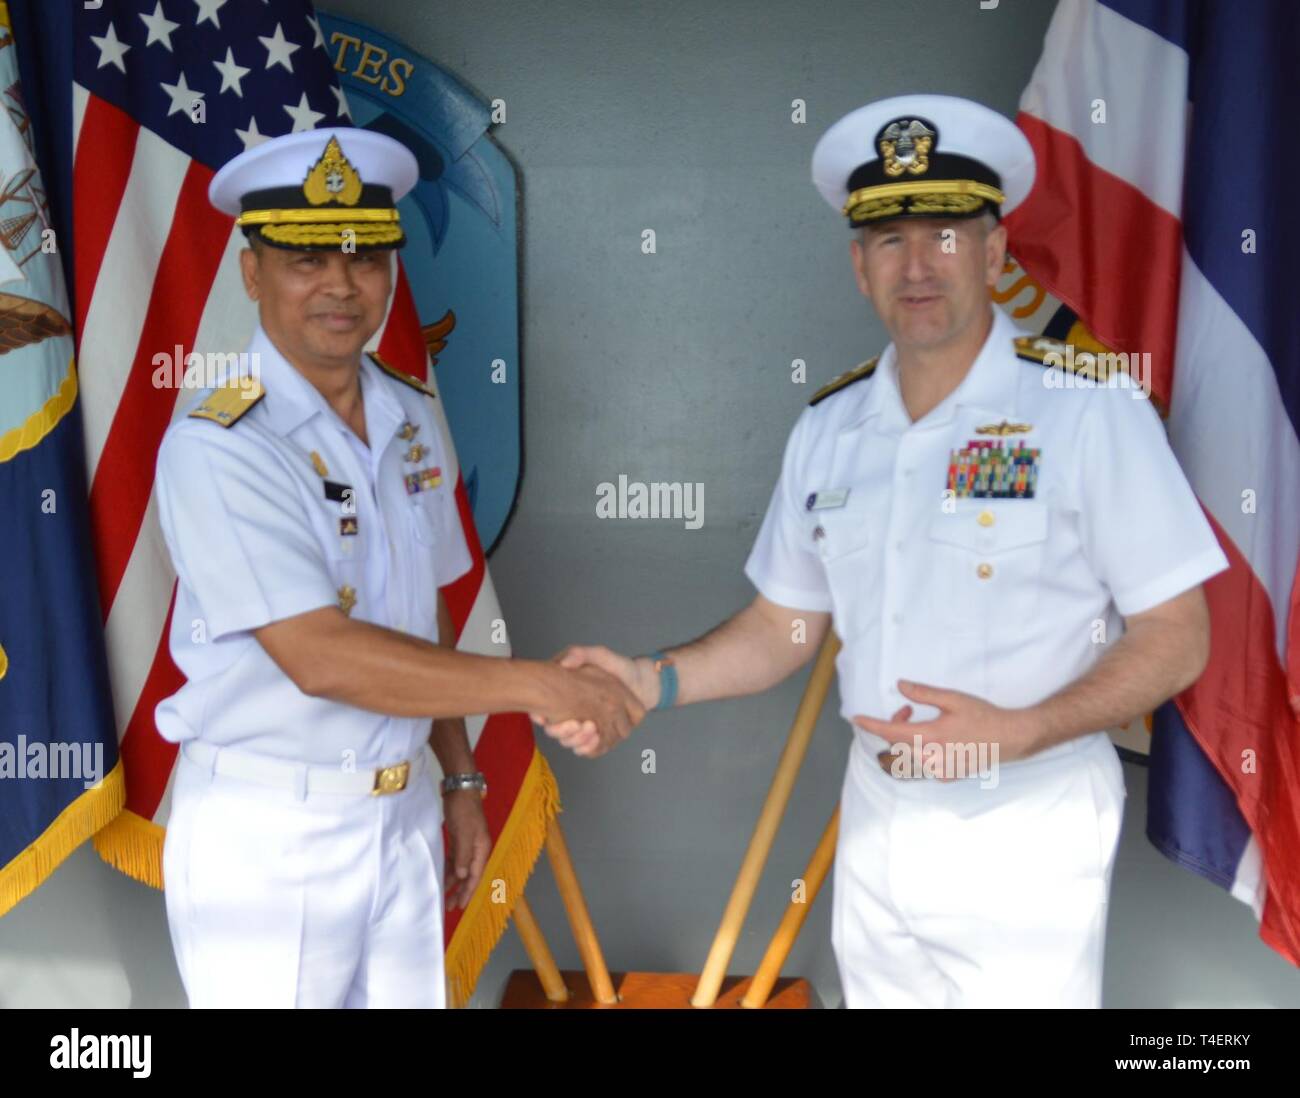 LAEM CHABANG, Thailand (April 4, 2019) Deputy Commander, U.S. 7th Fleet, Rear Adm. Ted LeClair greets Deputy Director General, Royal Thai Navy, Somchat Sata aboard the U.S. 7th Fleet flagship USS Blue Ridge (LCC 19). The 7th Fleet intent for the exchange is to increase Theater Security Cooperation through the facilitation of bilateral and multilateral military exchanges and dialogue. Stock Photo